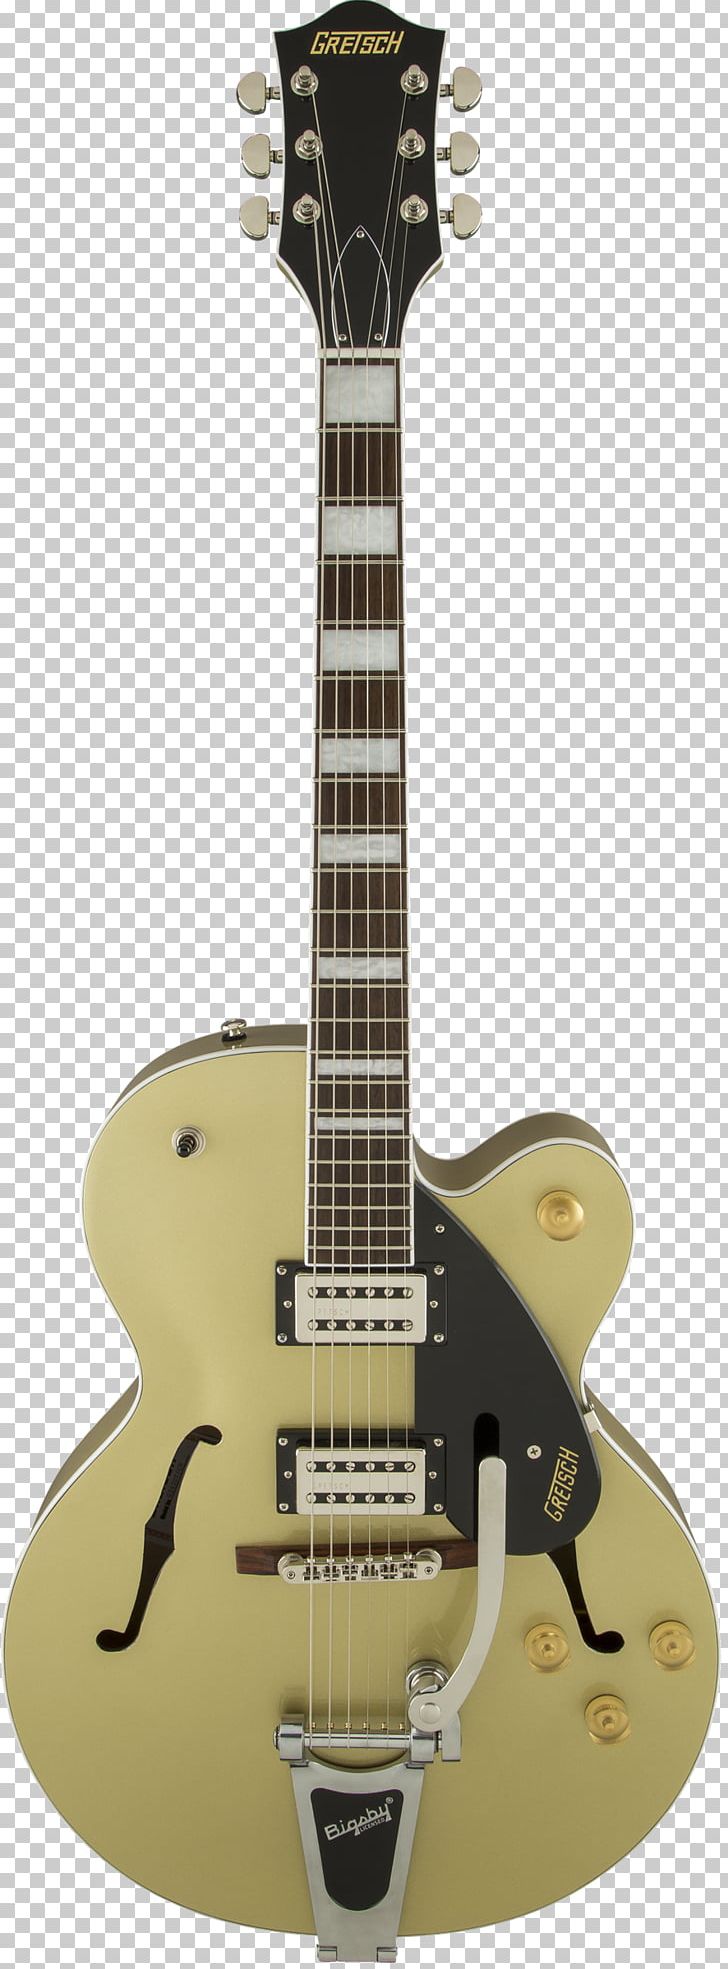 Gretsch G2420 Streamliner Hollowbody Electric Guitar Gretsch G5420T Streamliner Electric Guitar Bigsby Vibrato Tailpiece PNG, Clipart, Acoustic Electric Guitar, Archtop Guitar, Cutaway, Gretsch, Guitar Free PNG Download